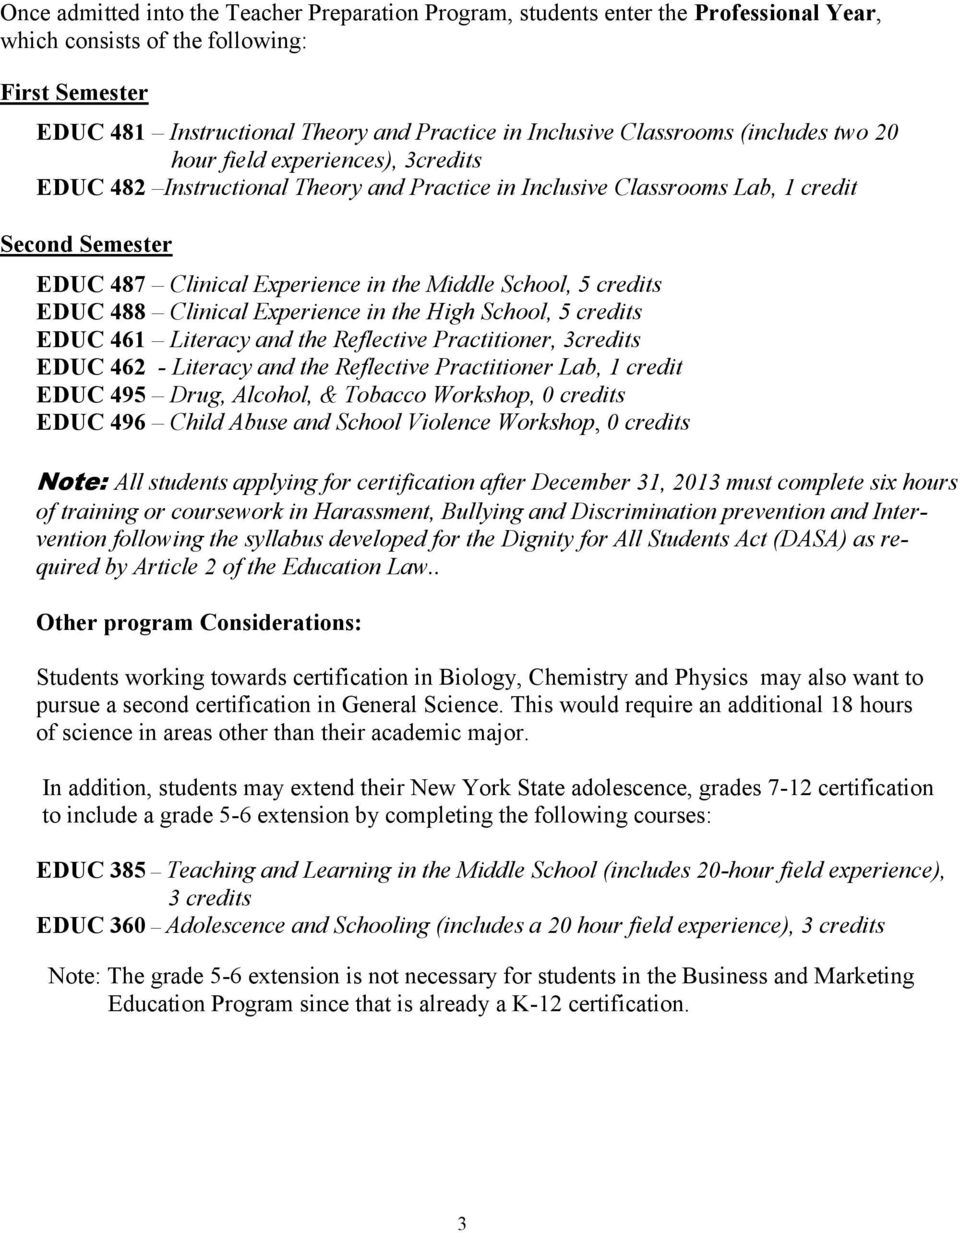 Middle School, 5 credits EDUC 488 Clinical Experience in the High School, 5 credits EDUC 461 Literacy and the Reflective Practitioner, 3credits EDUC 462 - Literacy and the Reflective Practitioner